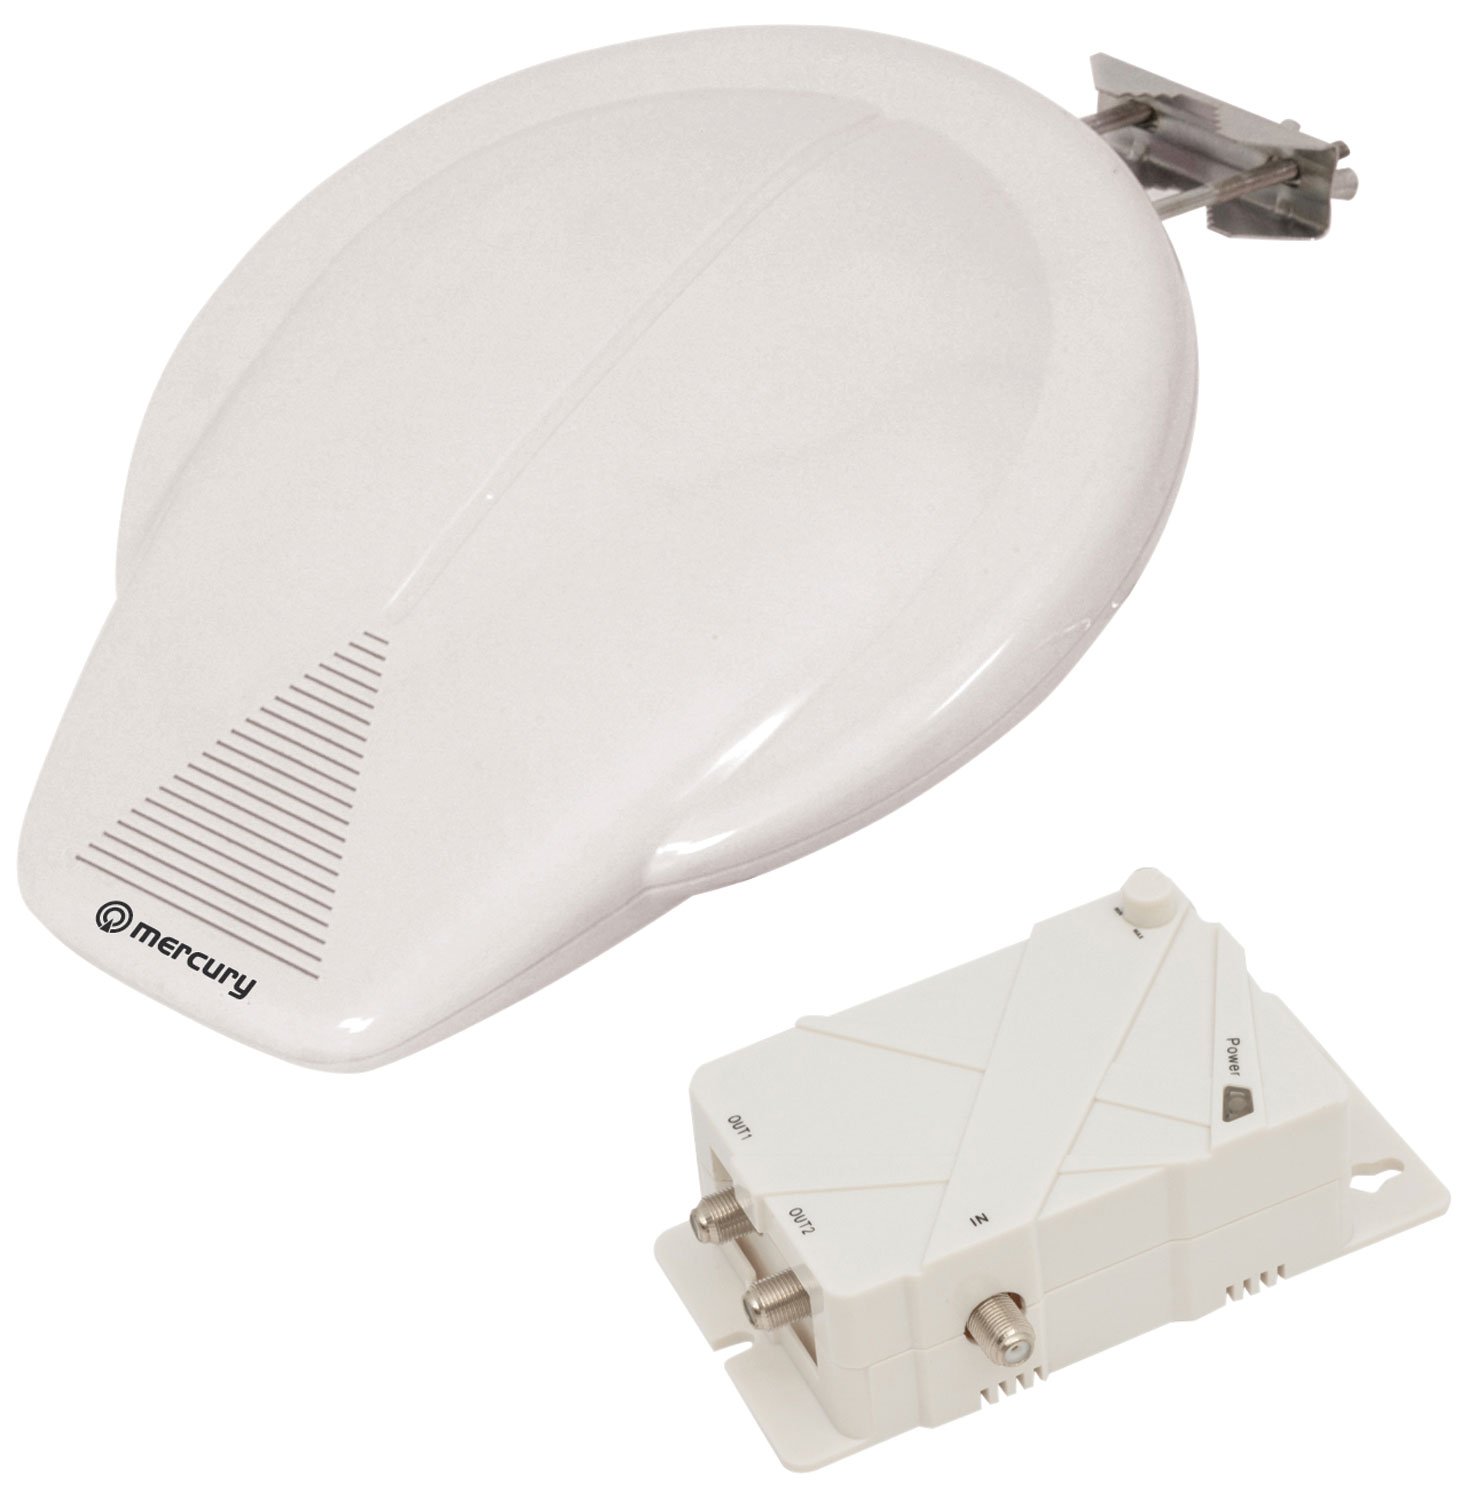 Outdoor Amplified HDTV Aerial for Caravans and Boats Outdoor Amplified HDTV Aerial for Caravans and Boats